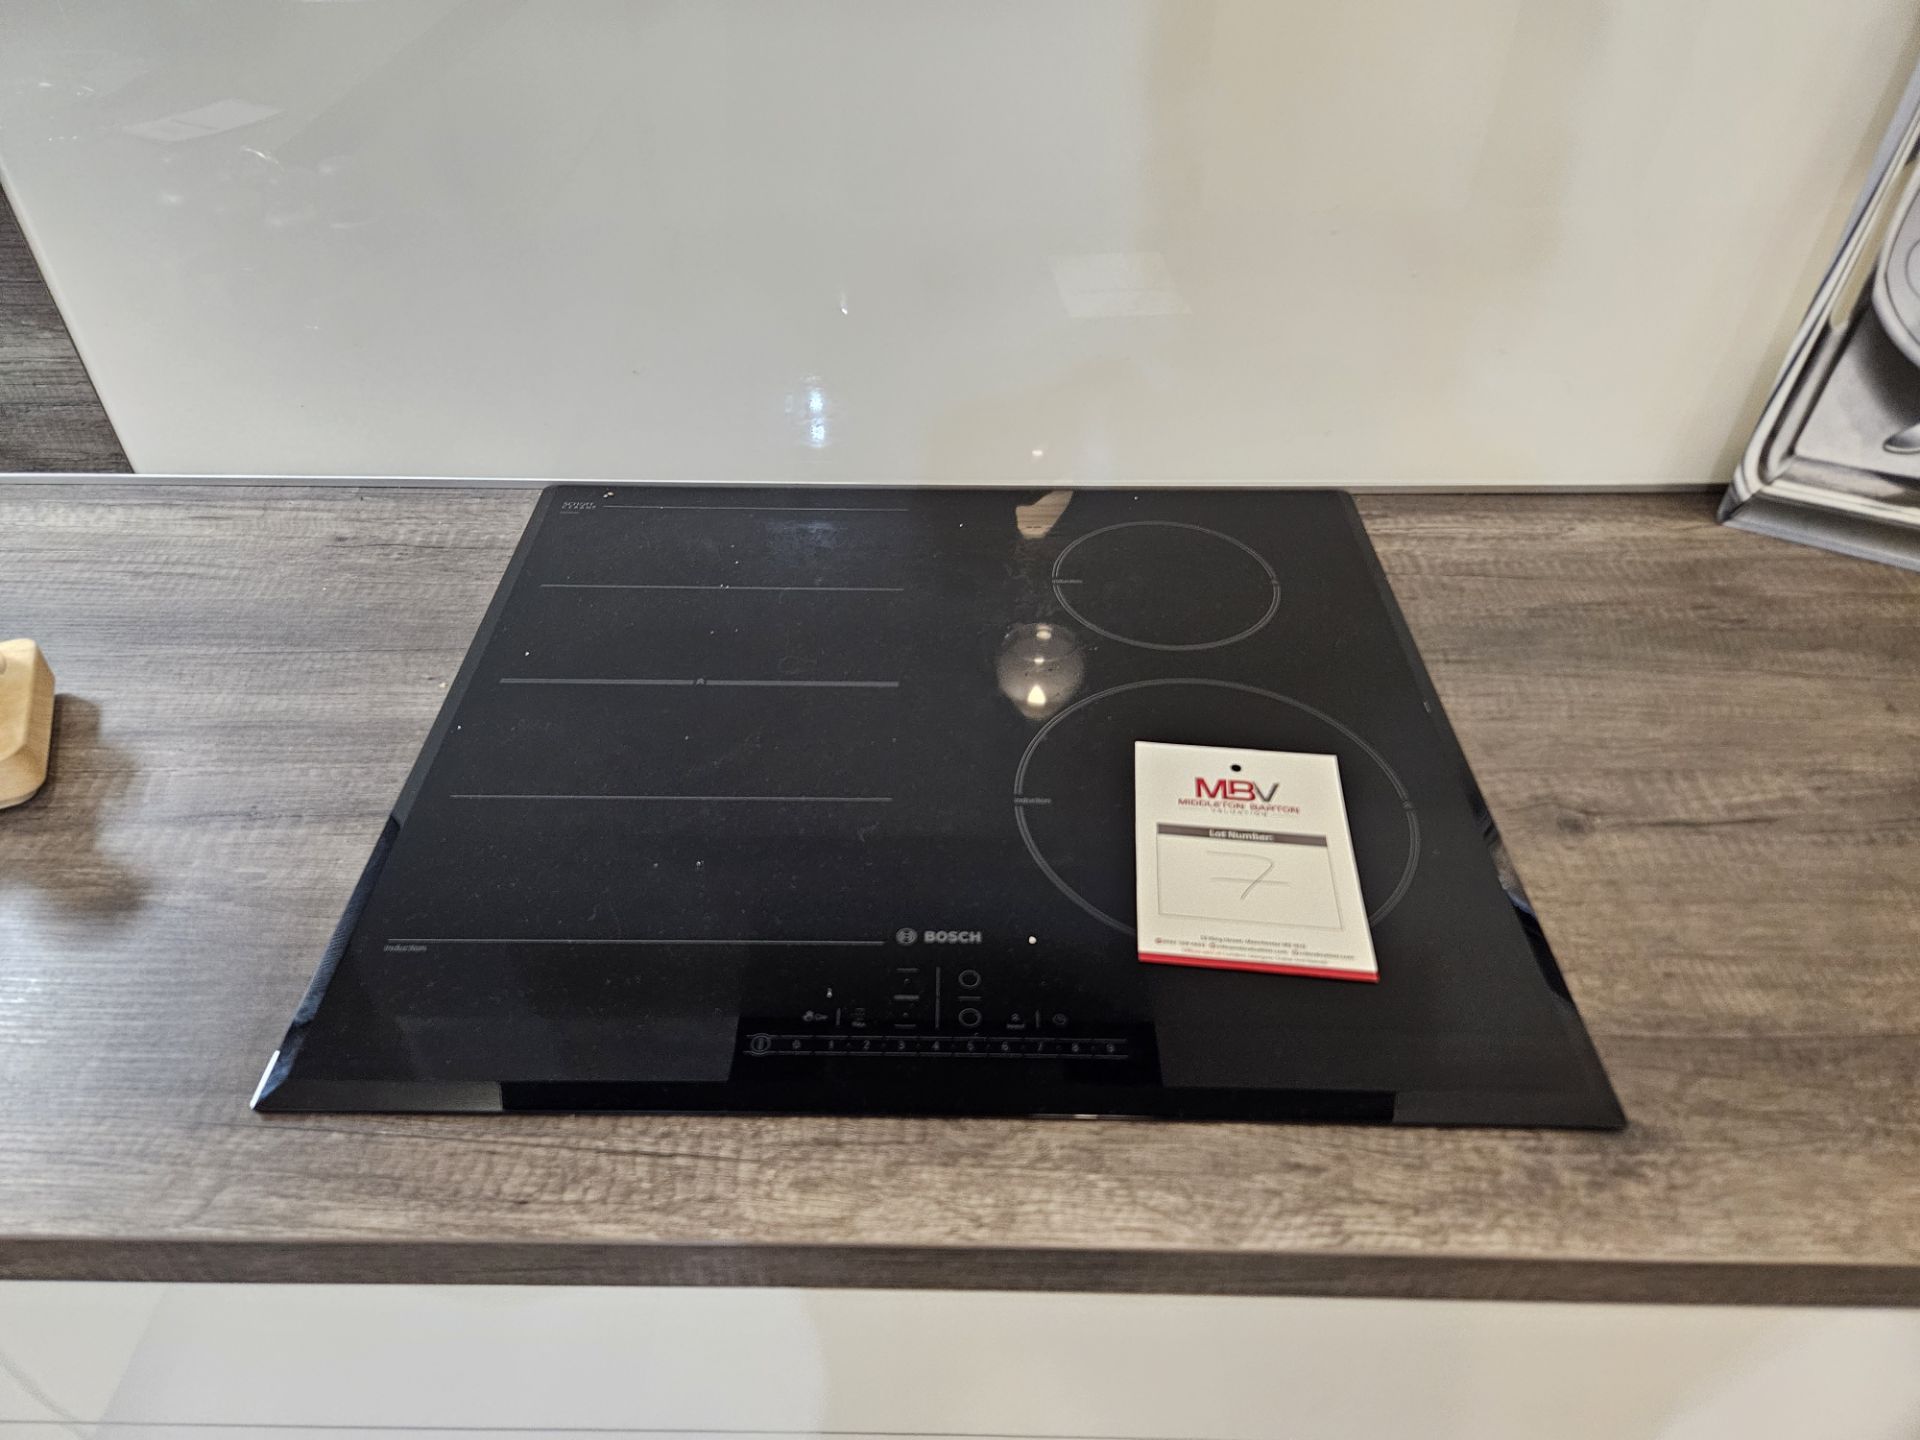 Bosch induction hob in black and Bosch wall mounted cooker hood in gloss black - Image 4 of 6